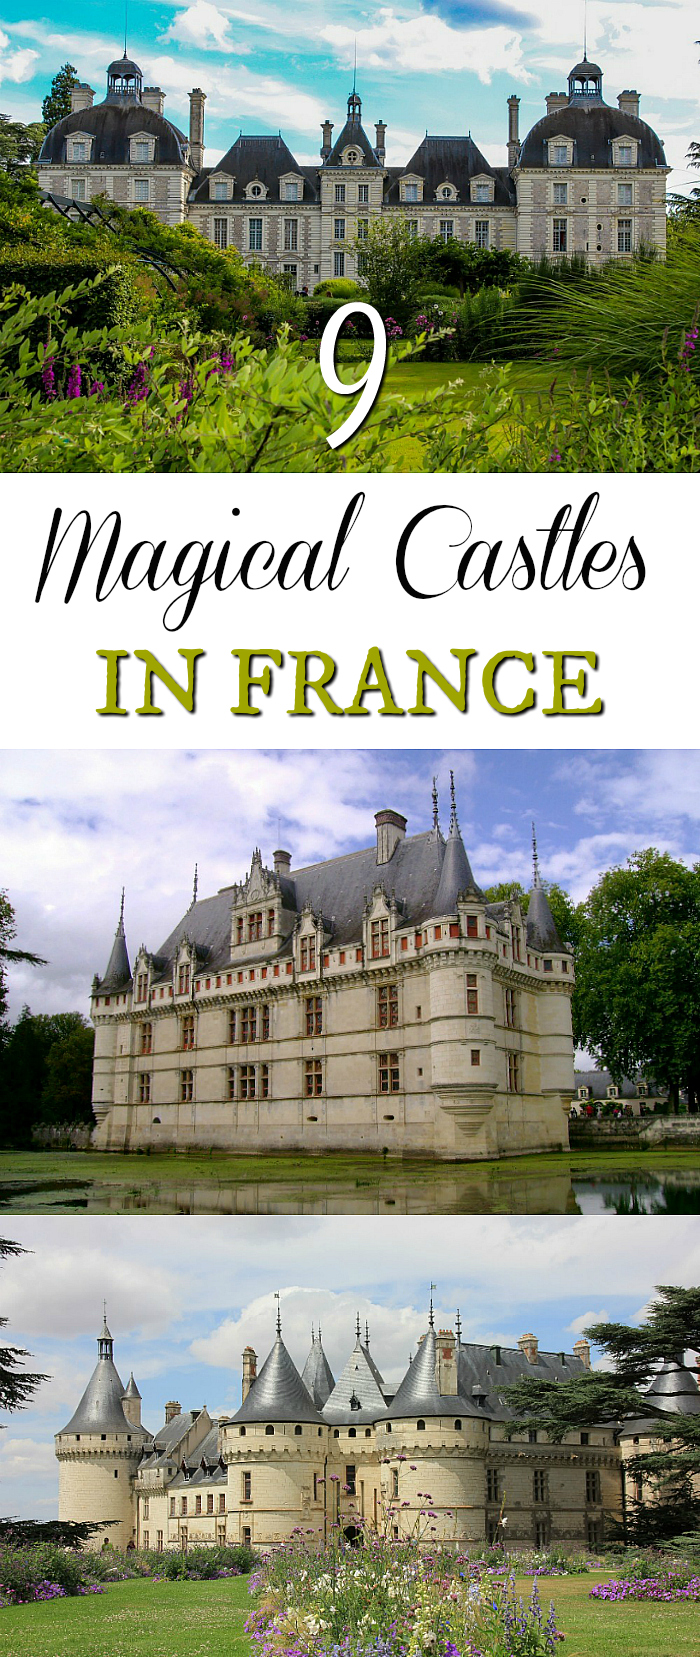 Magical castles in france, chateaus in France